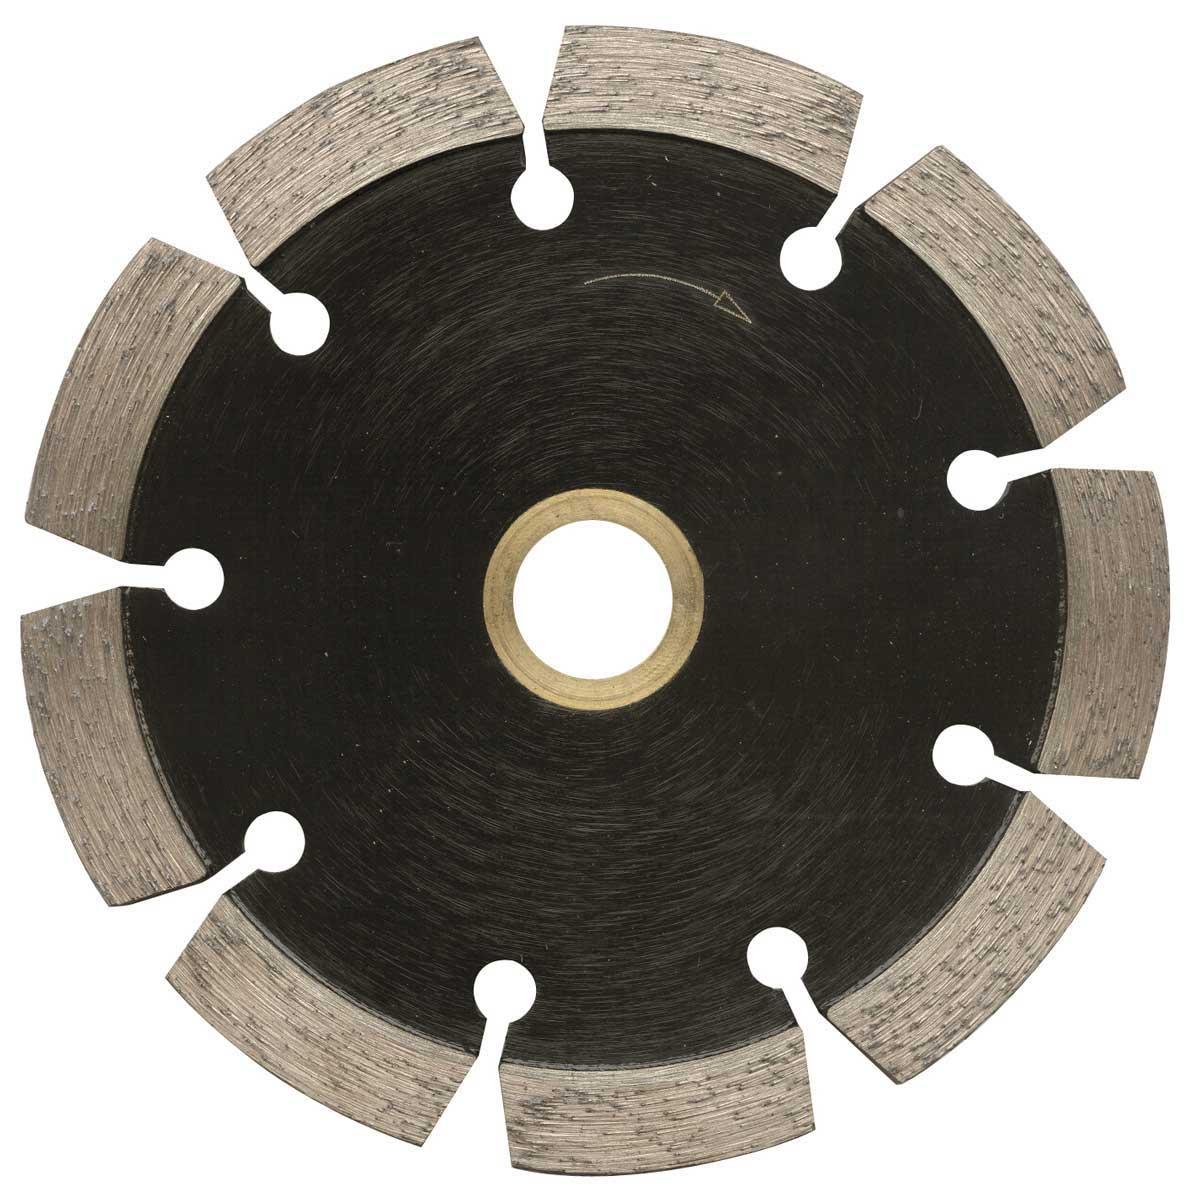 7 Inch Tuck Point Blade Concrete Mortar Joint Removal DM7/8 Inch-5/8 Inch Arbor 